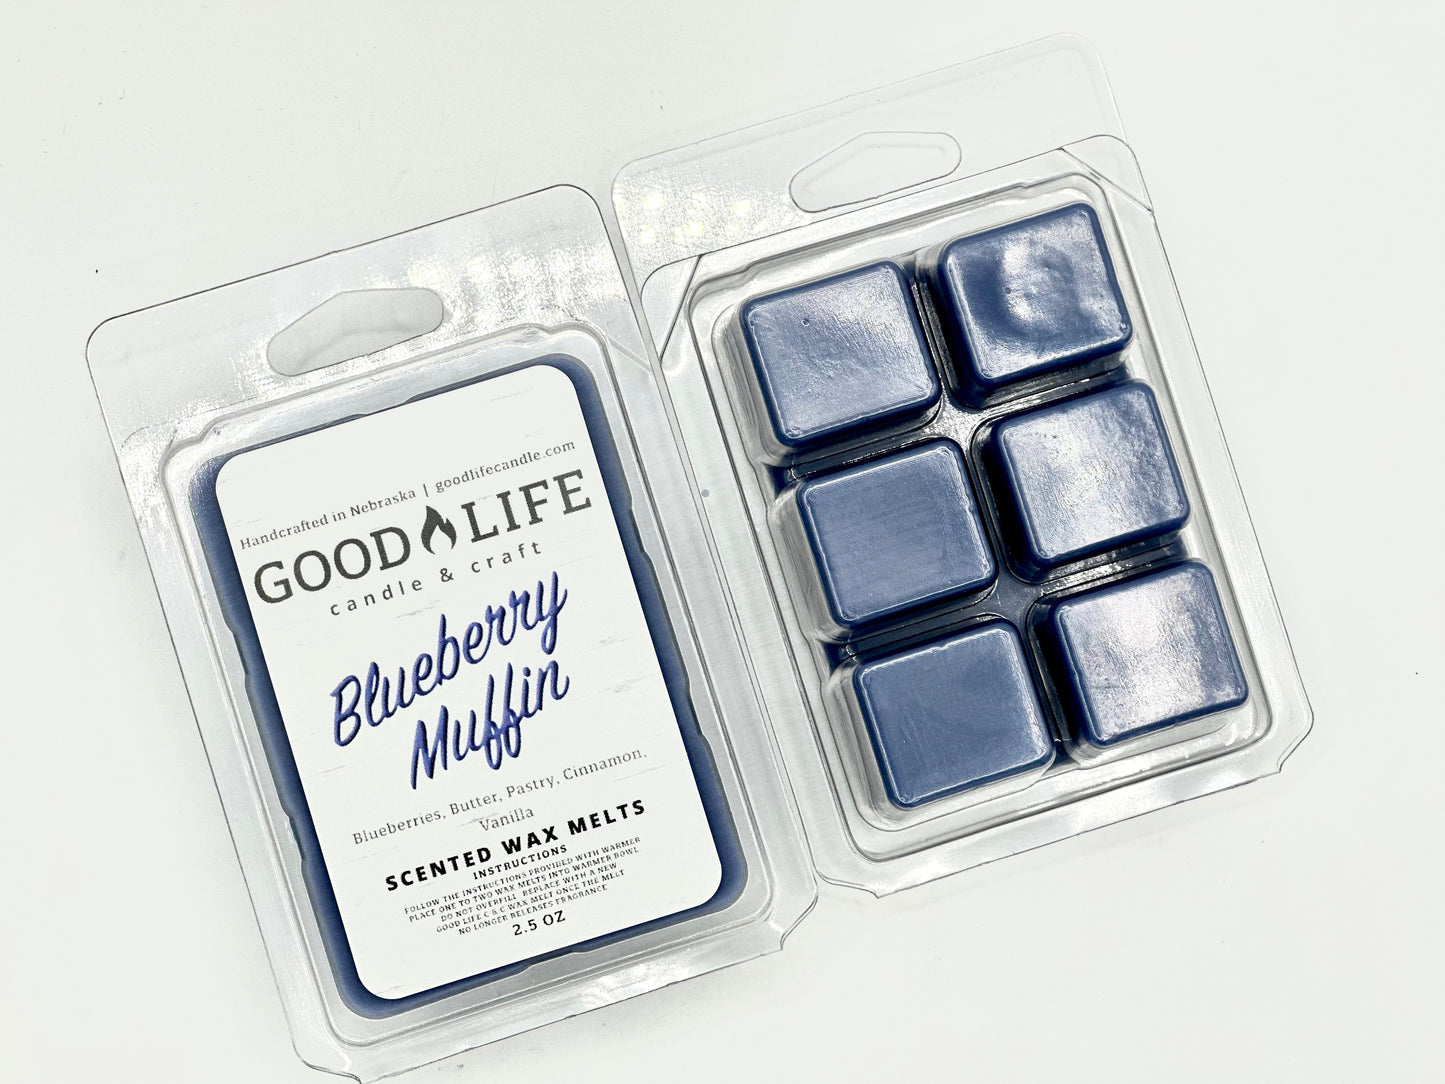 Blueberry Muffin Scented Wax Melts